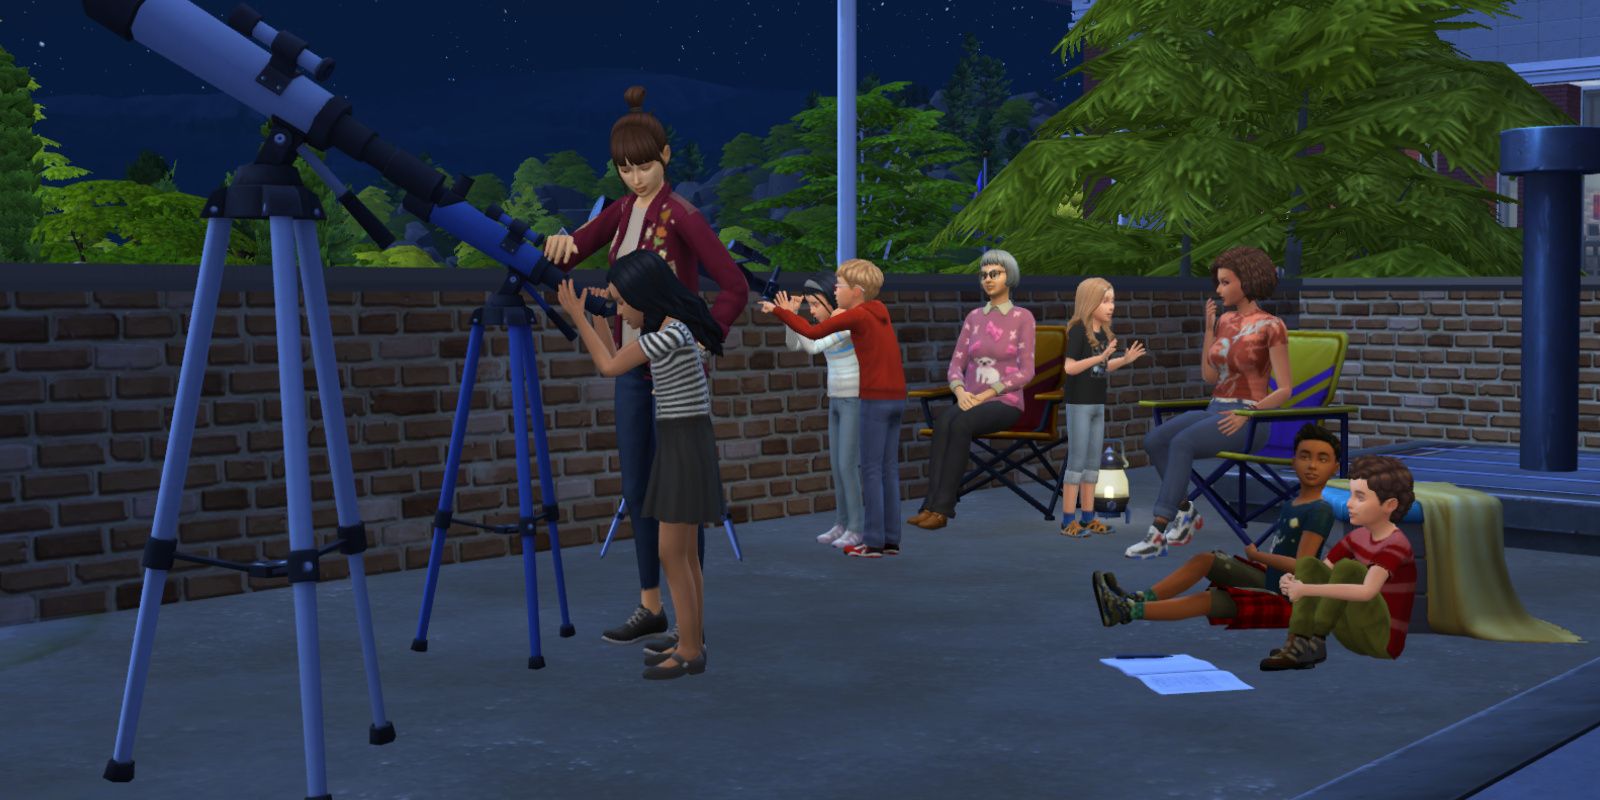 Sims meet up for their Astronomy Club after school activity